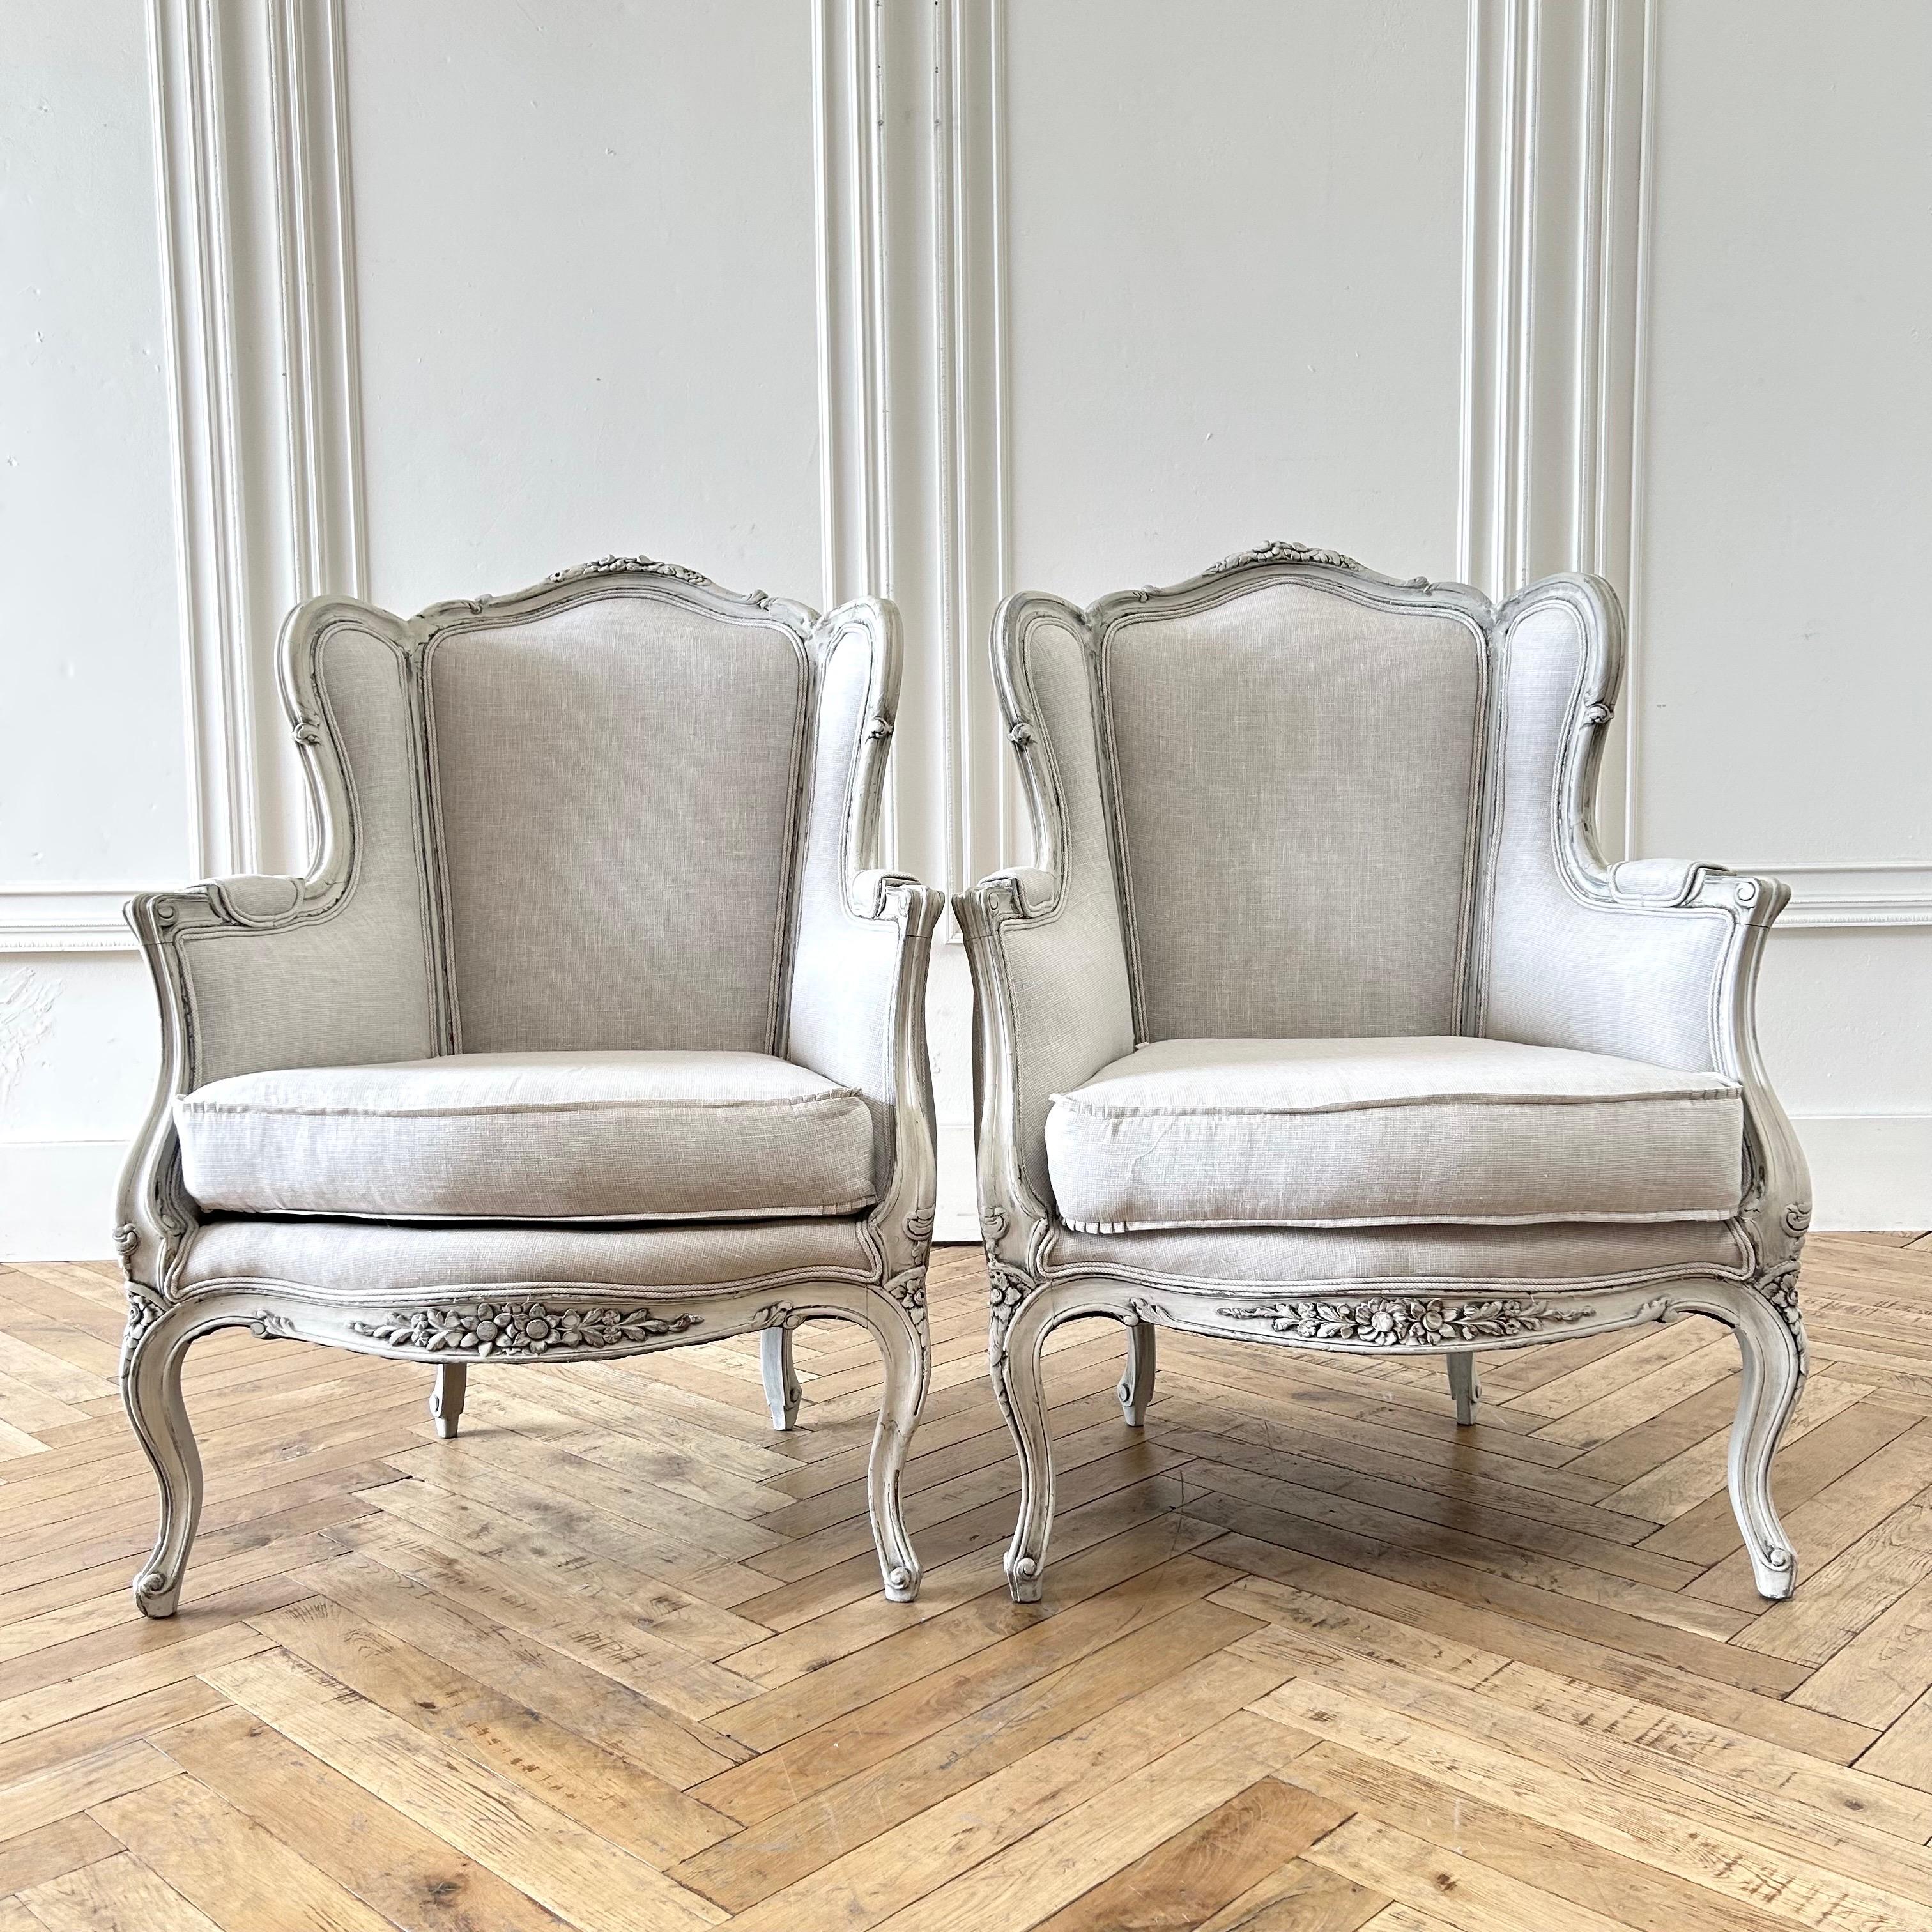 Pair of vintage painted and upholstered linen bergere chairs.
A soft distressed oyster white finish with an aged patina, upholstered in natural linen with a small gingham check. The seats have a pleated ruffle corner.
Solid and sturdy ready for